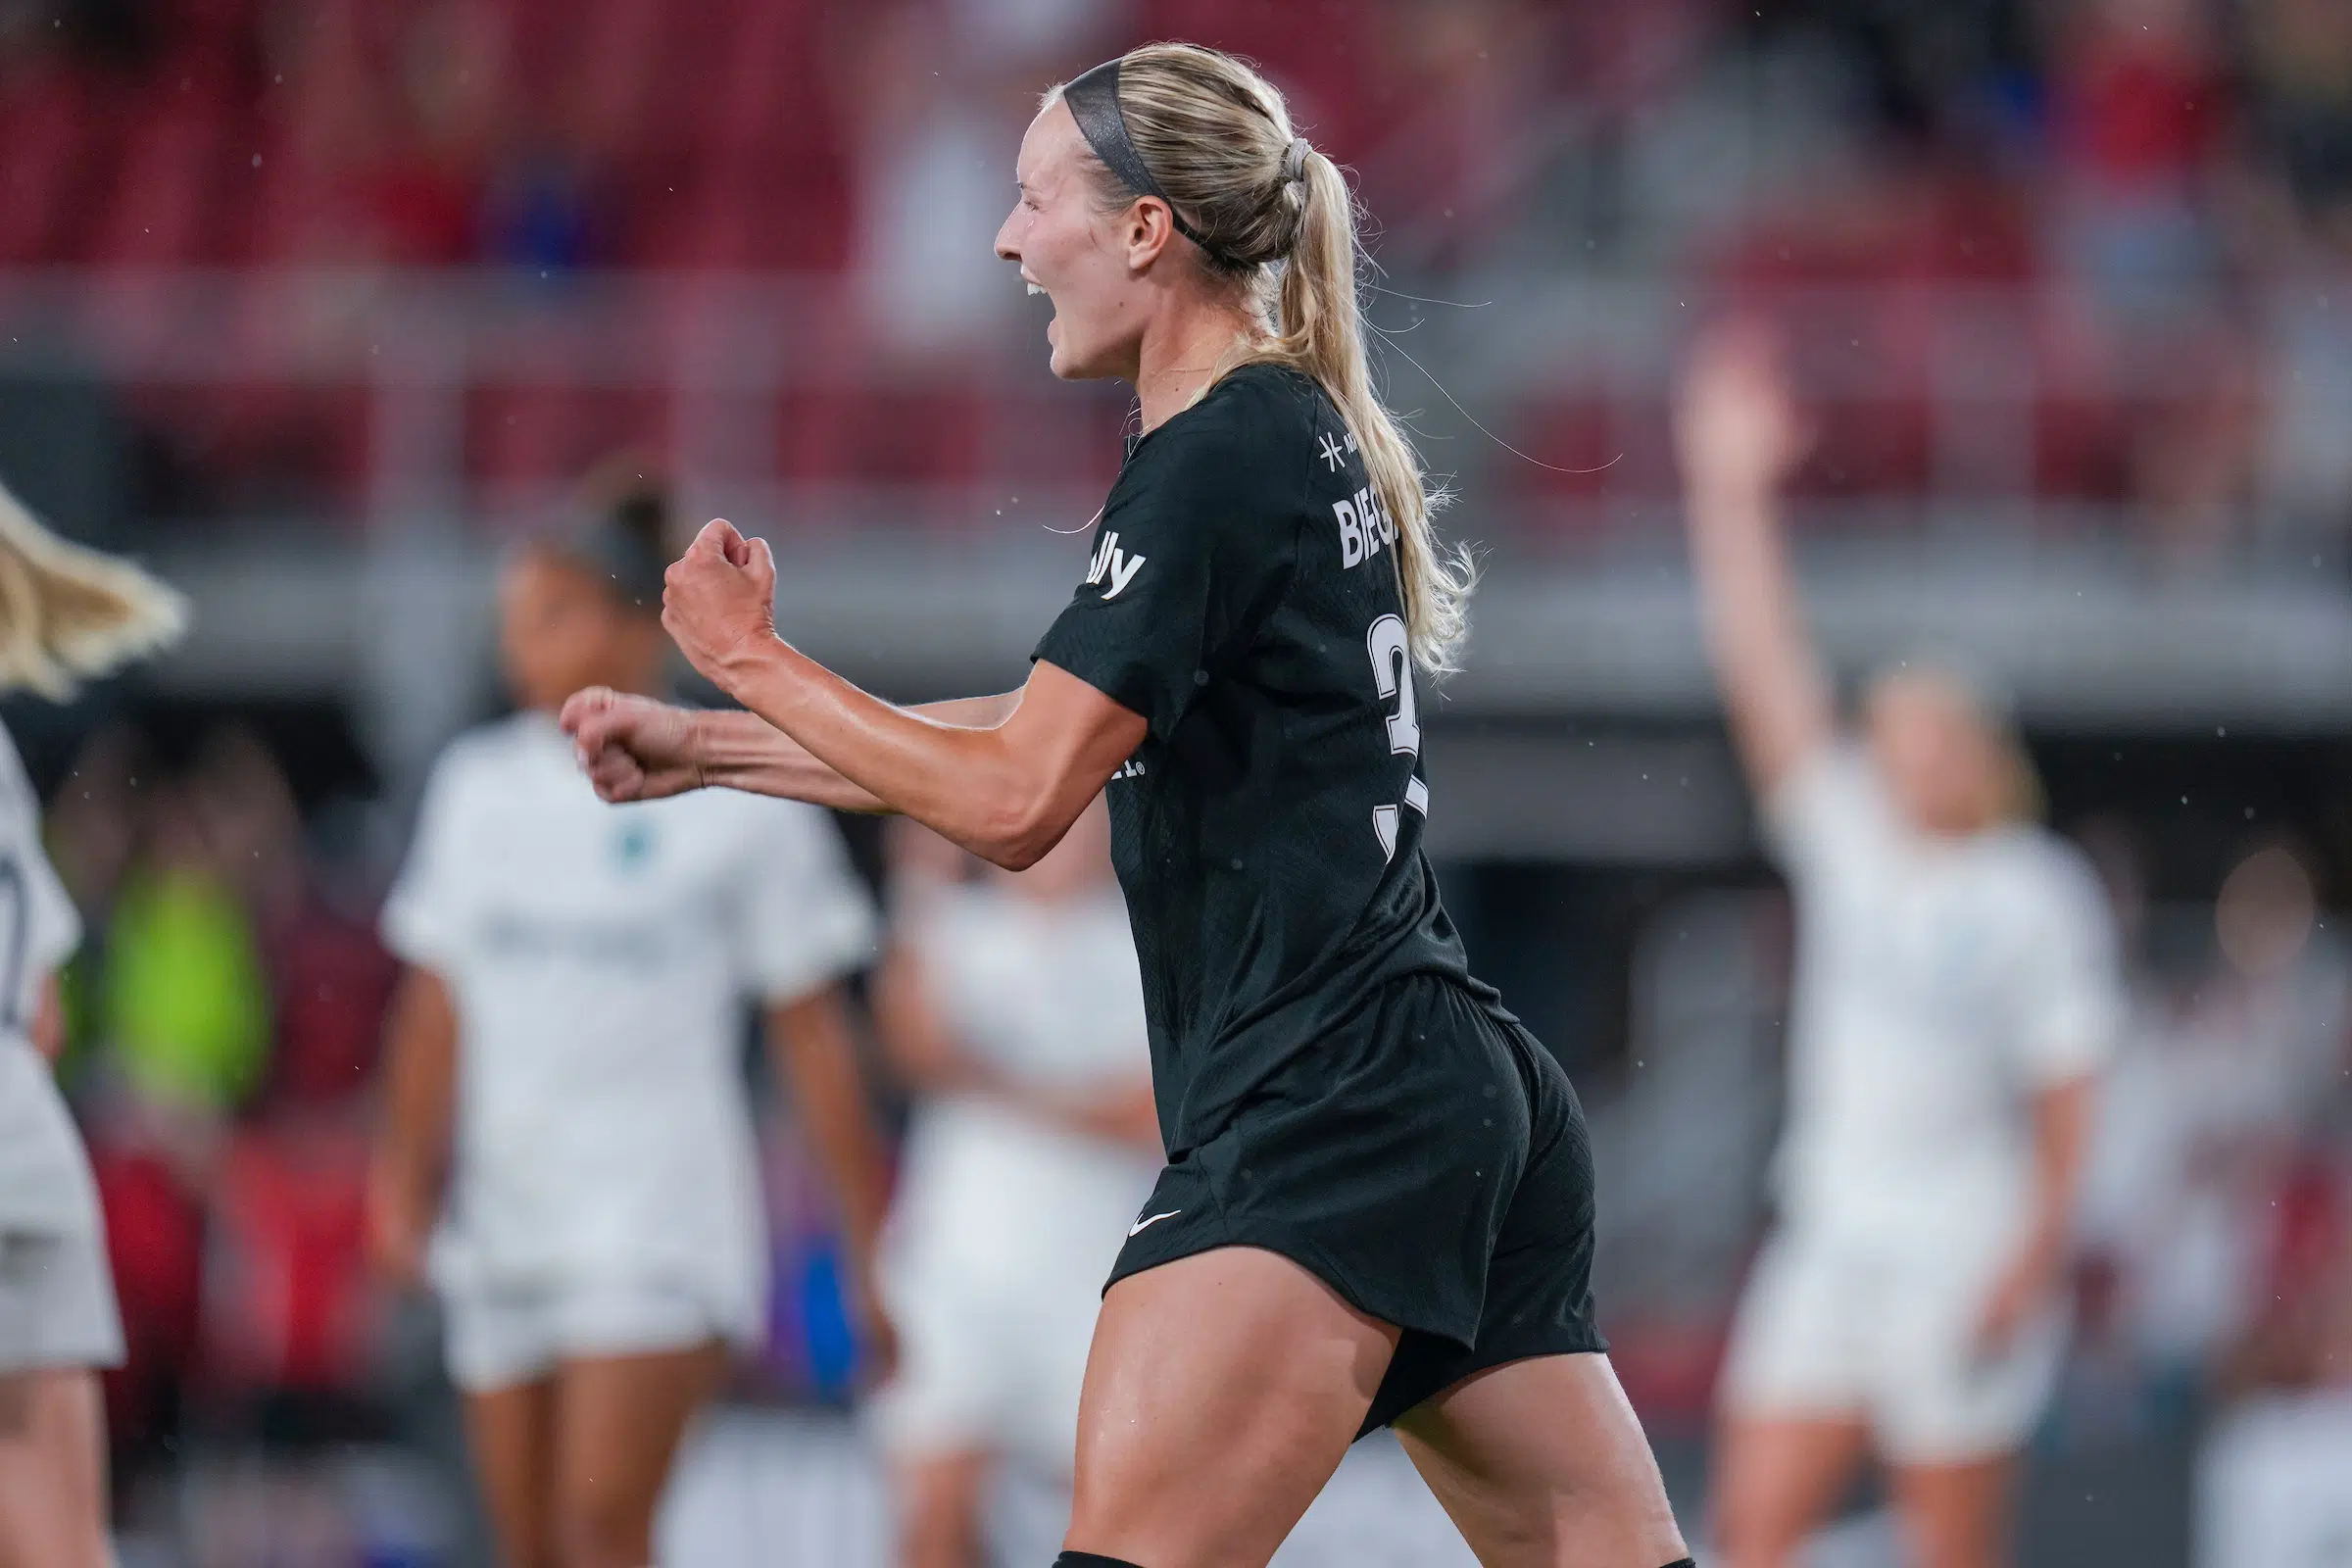 A blonde soccer player in an all black pumps her fist in excitement.